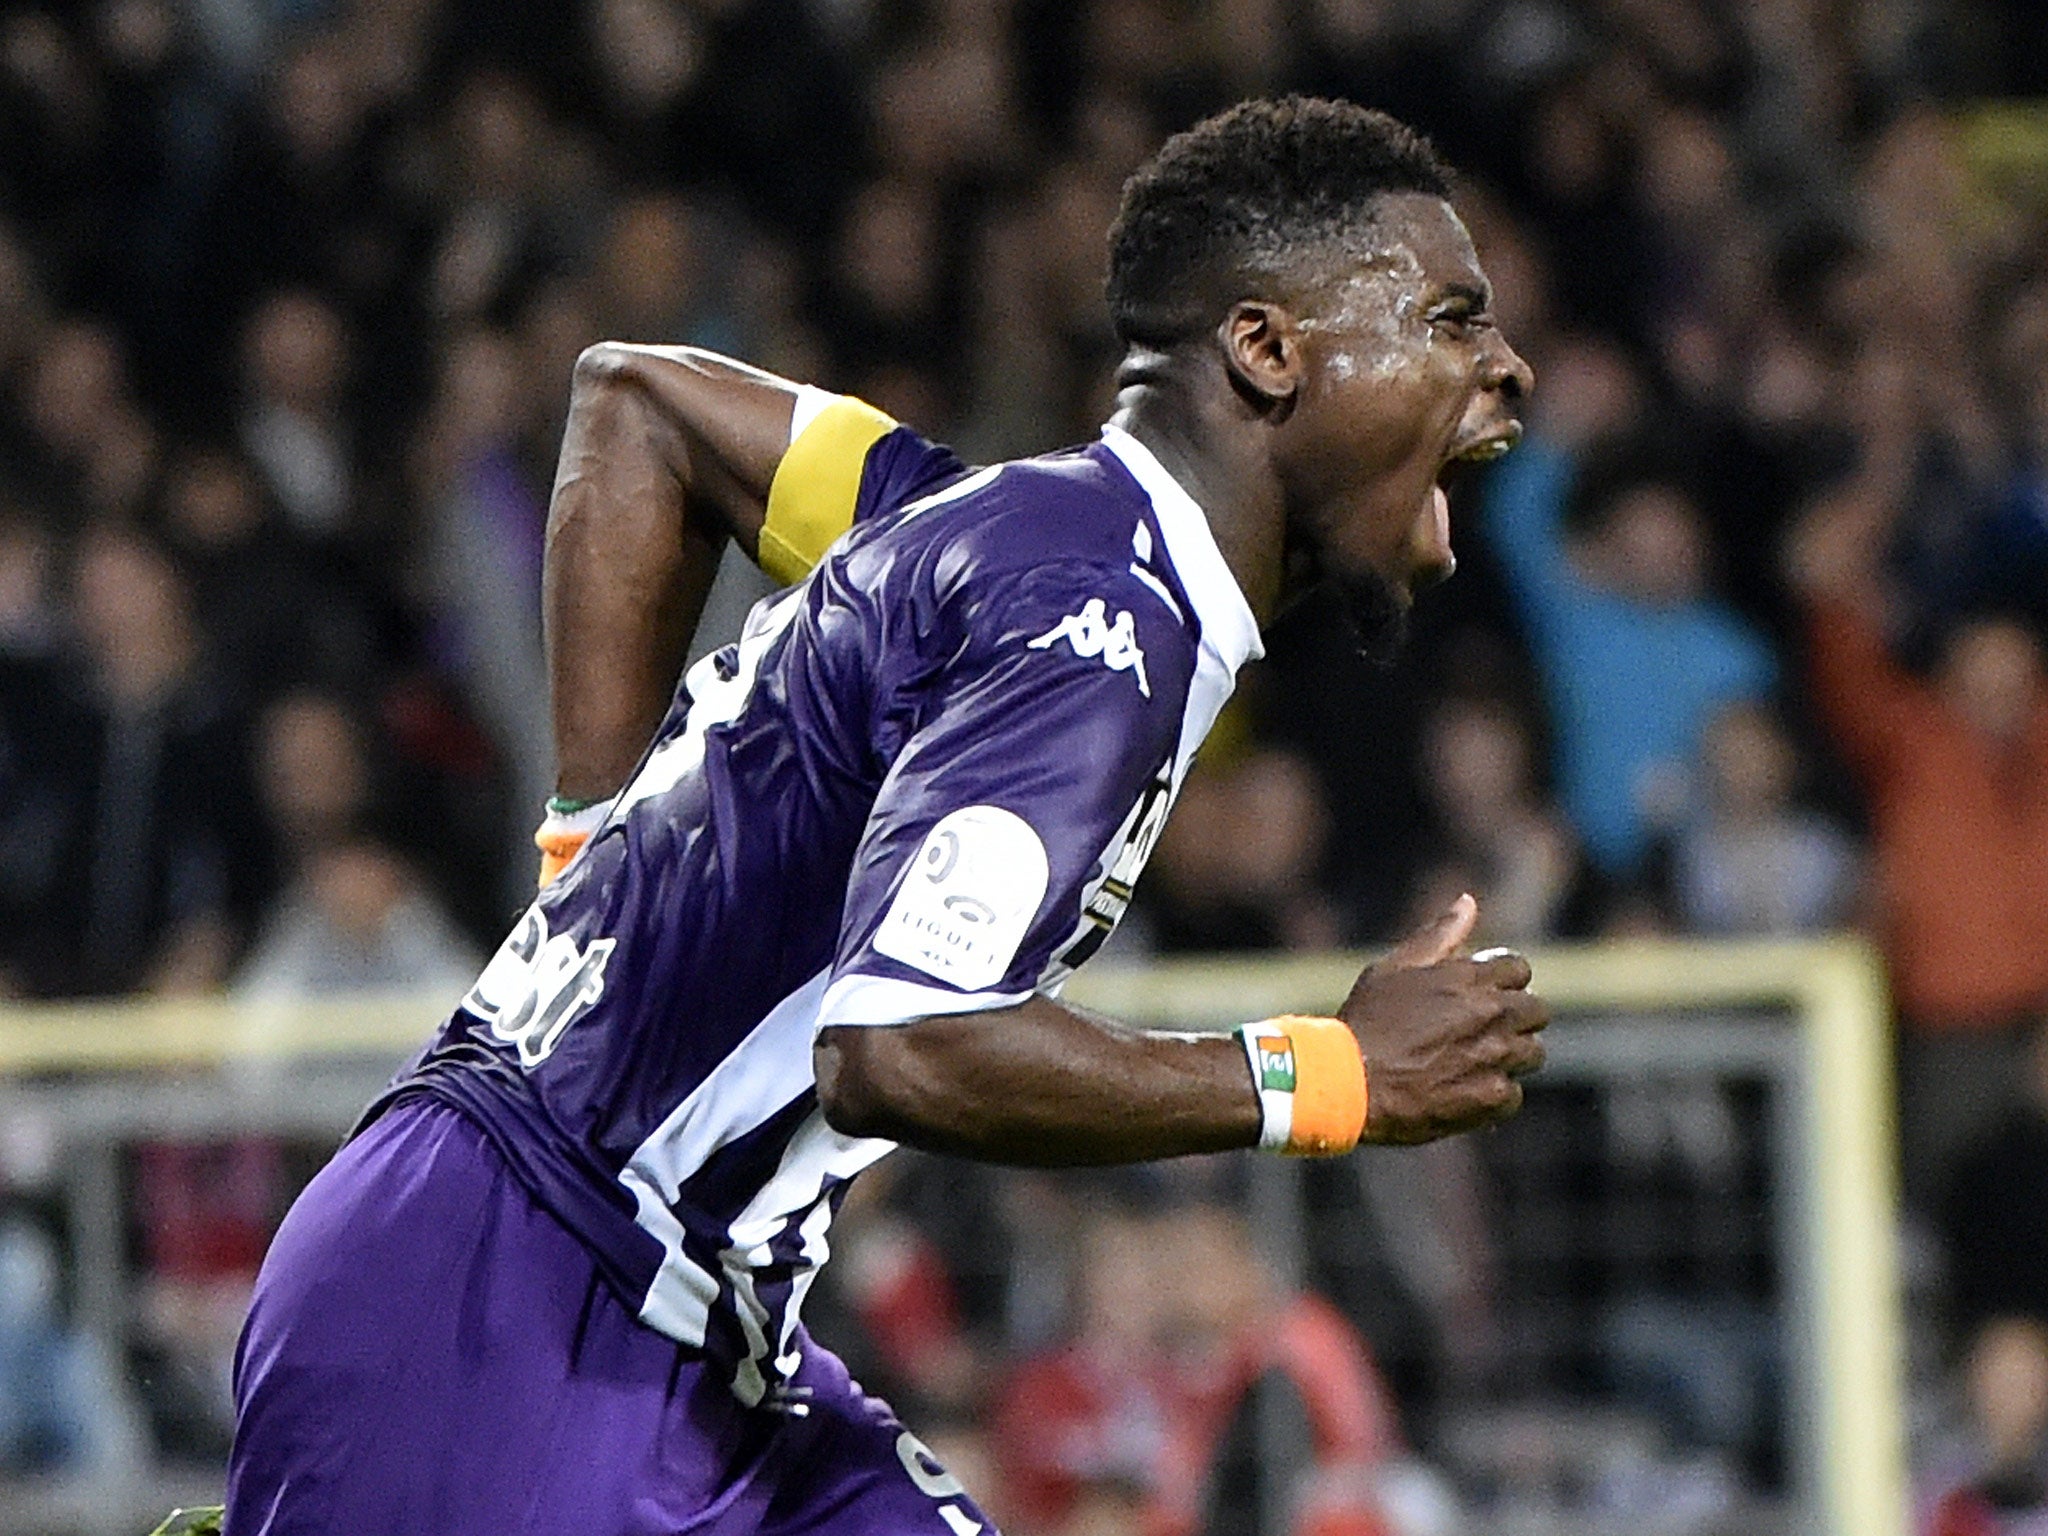 Toulouse right-back Aurier has described a move to Arsenal as 'a dream' but Chelsea and Newcastle United are also tracking the 21-year-old. The French defender has six goals and six assists so far this season. The Gunners are scouting right-backs across E